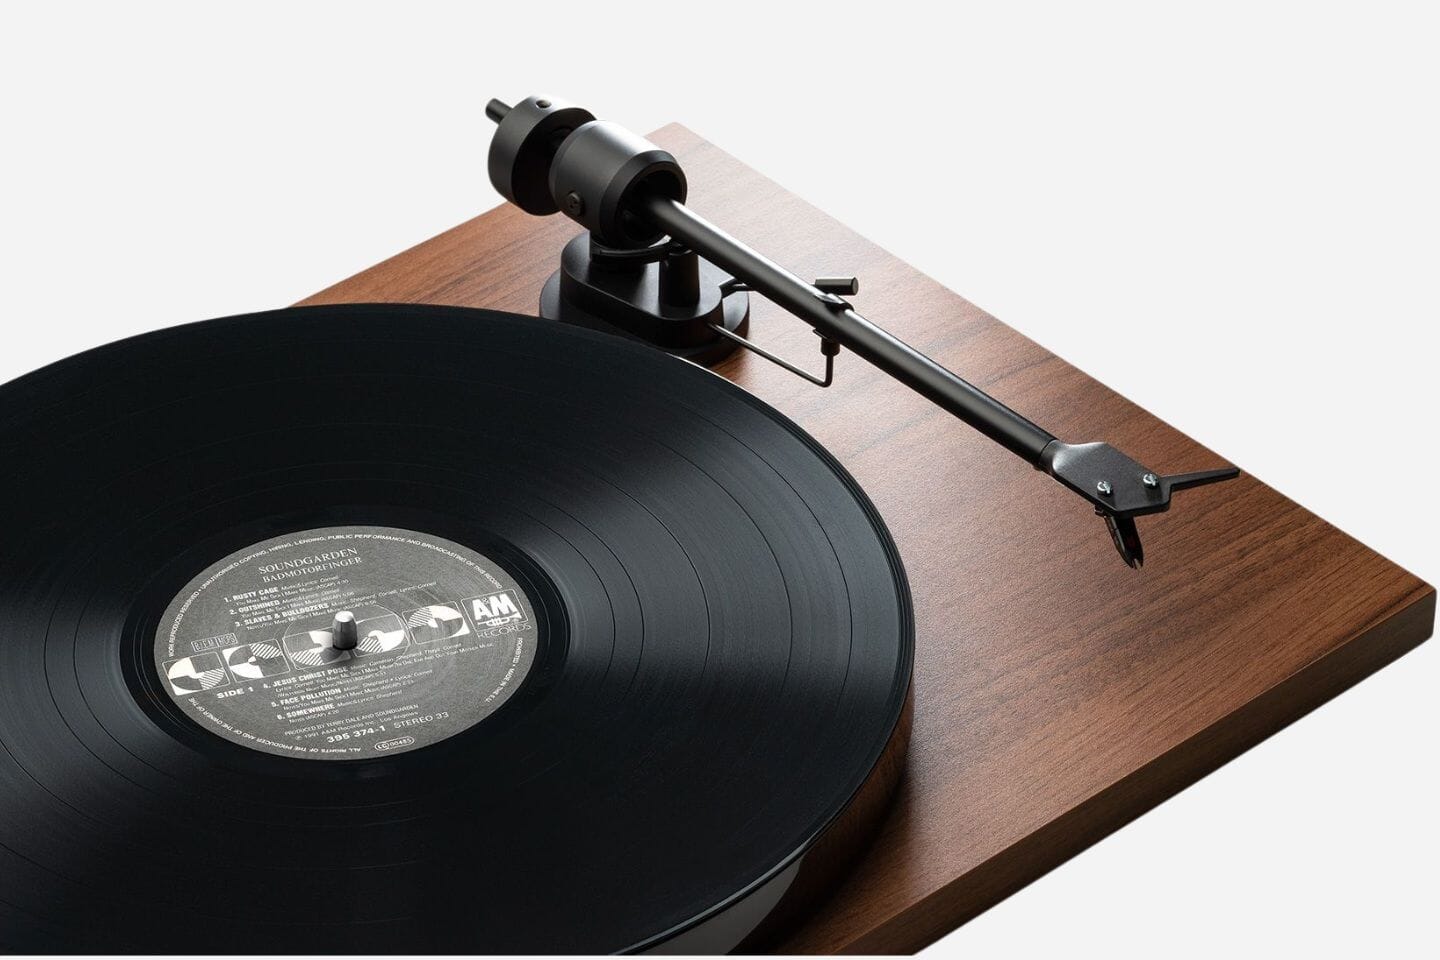 Find your perfect turntable bundle